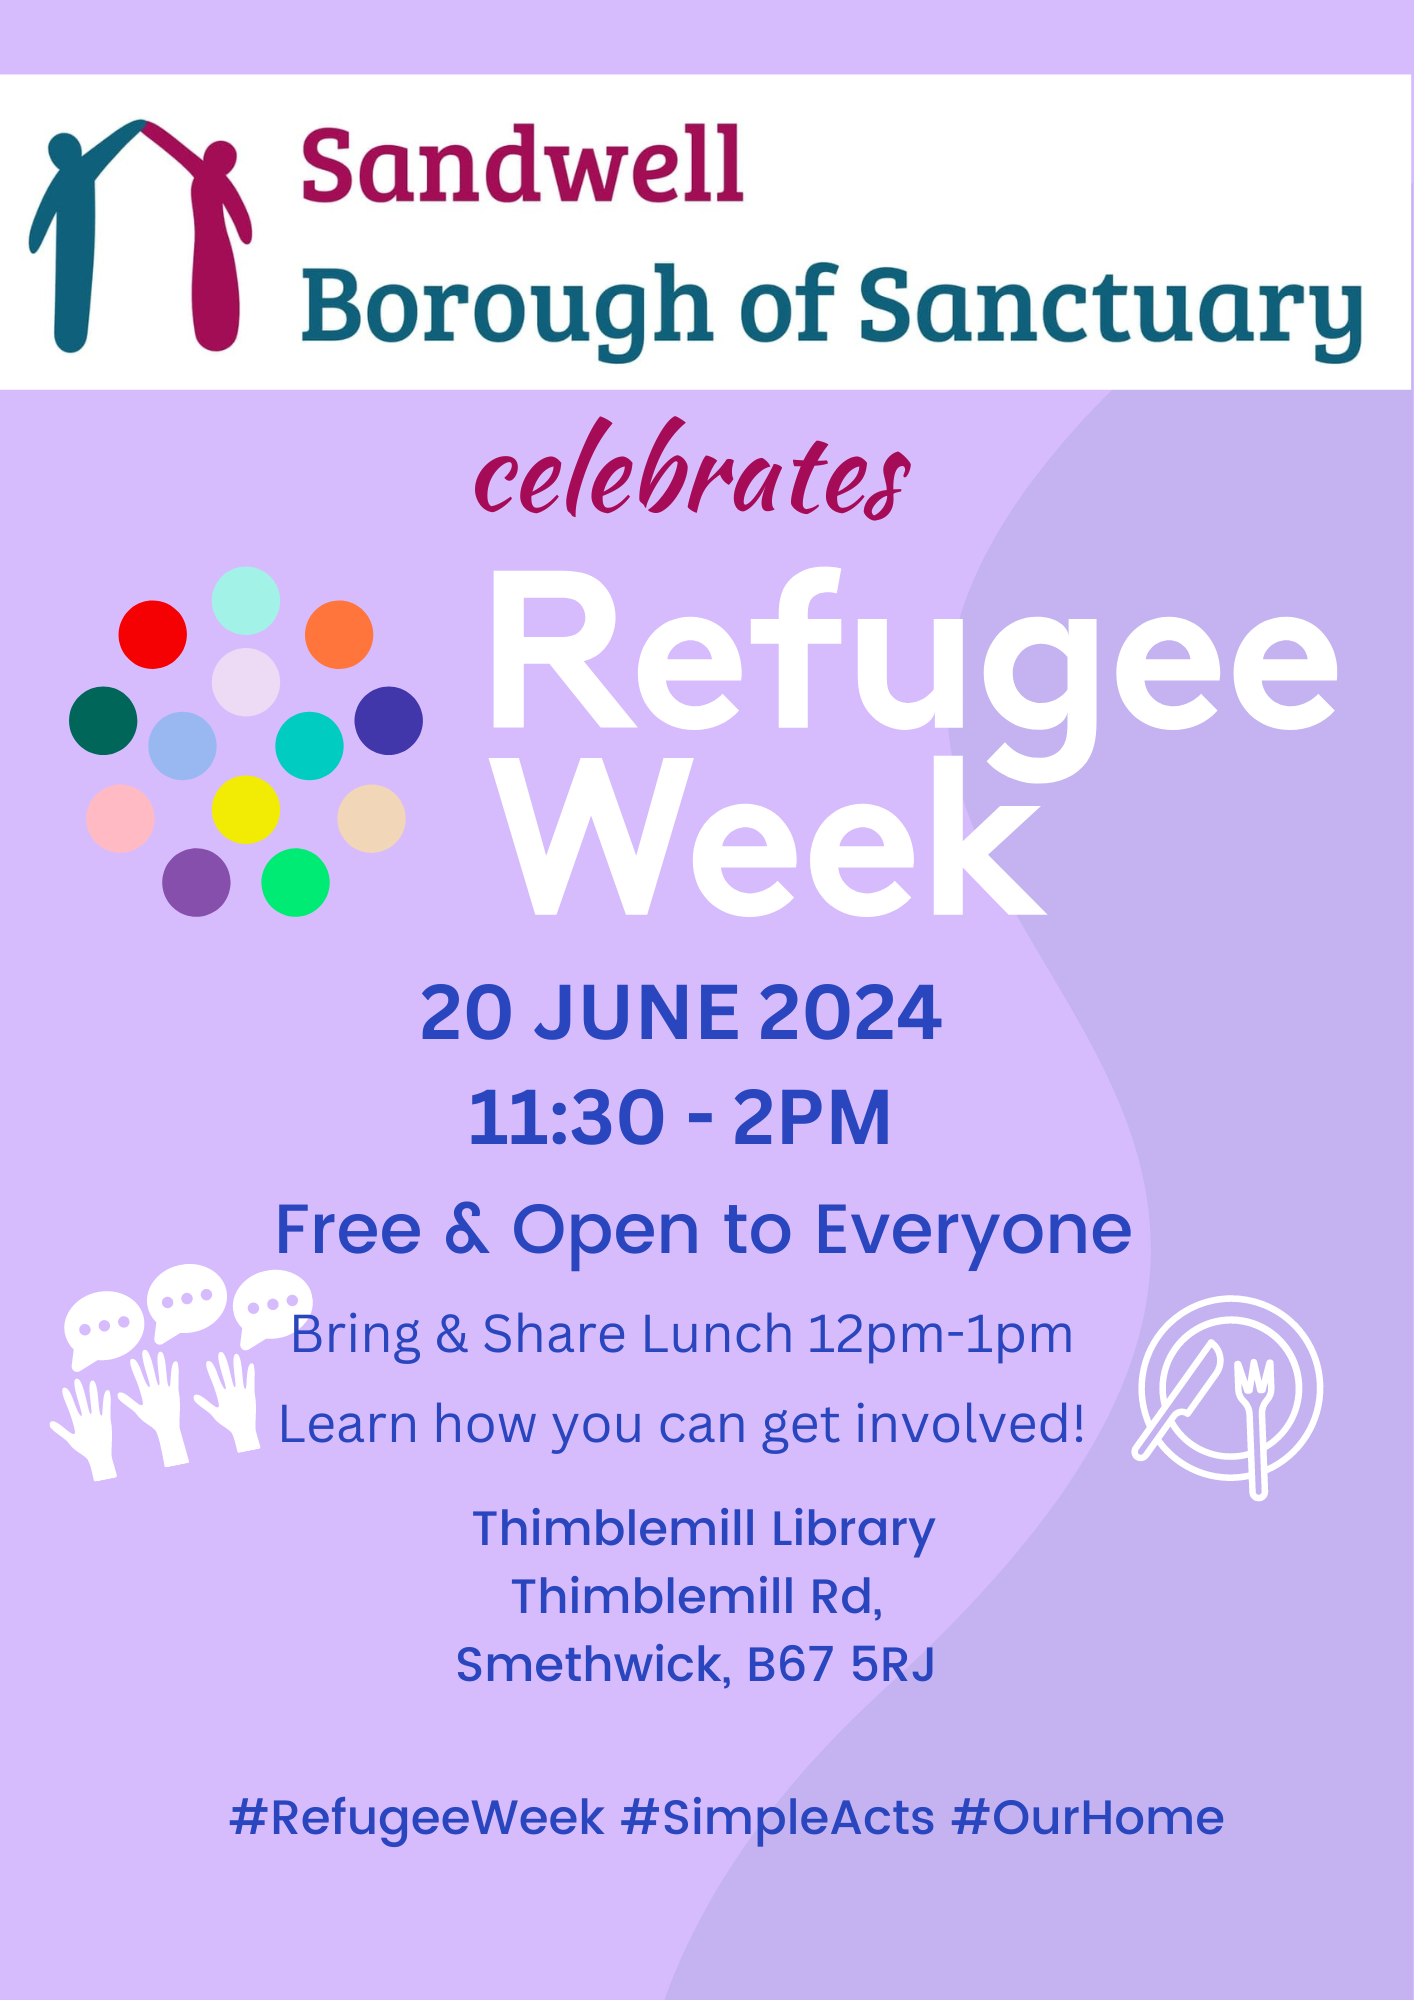 Sandwell Borough of Sanctuary Refugee Week Bring & Share Lunch